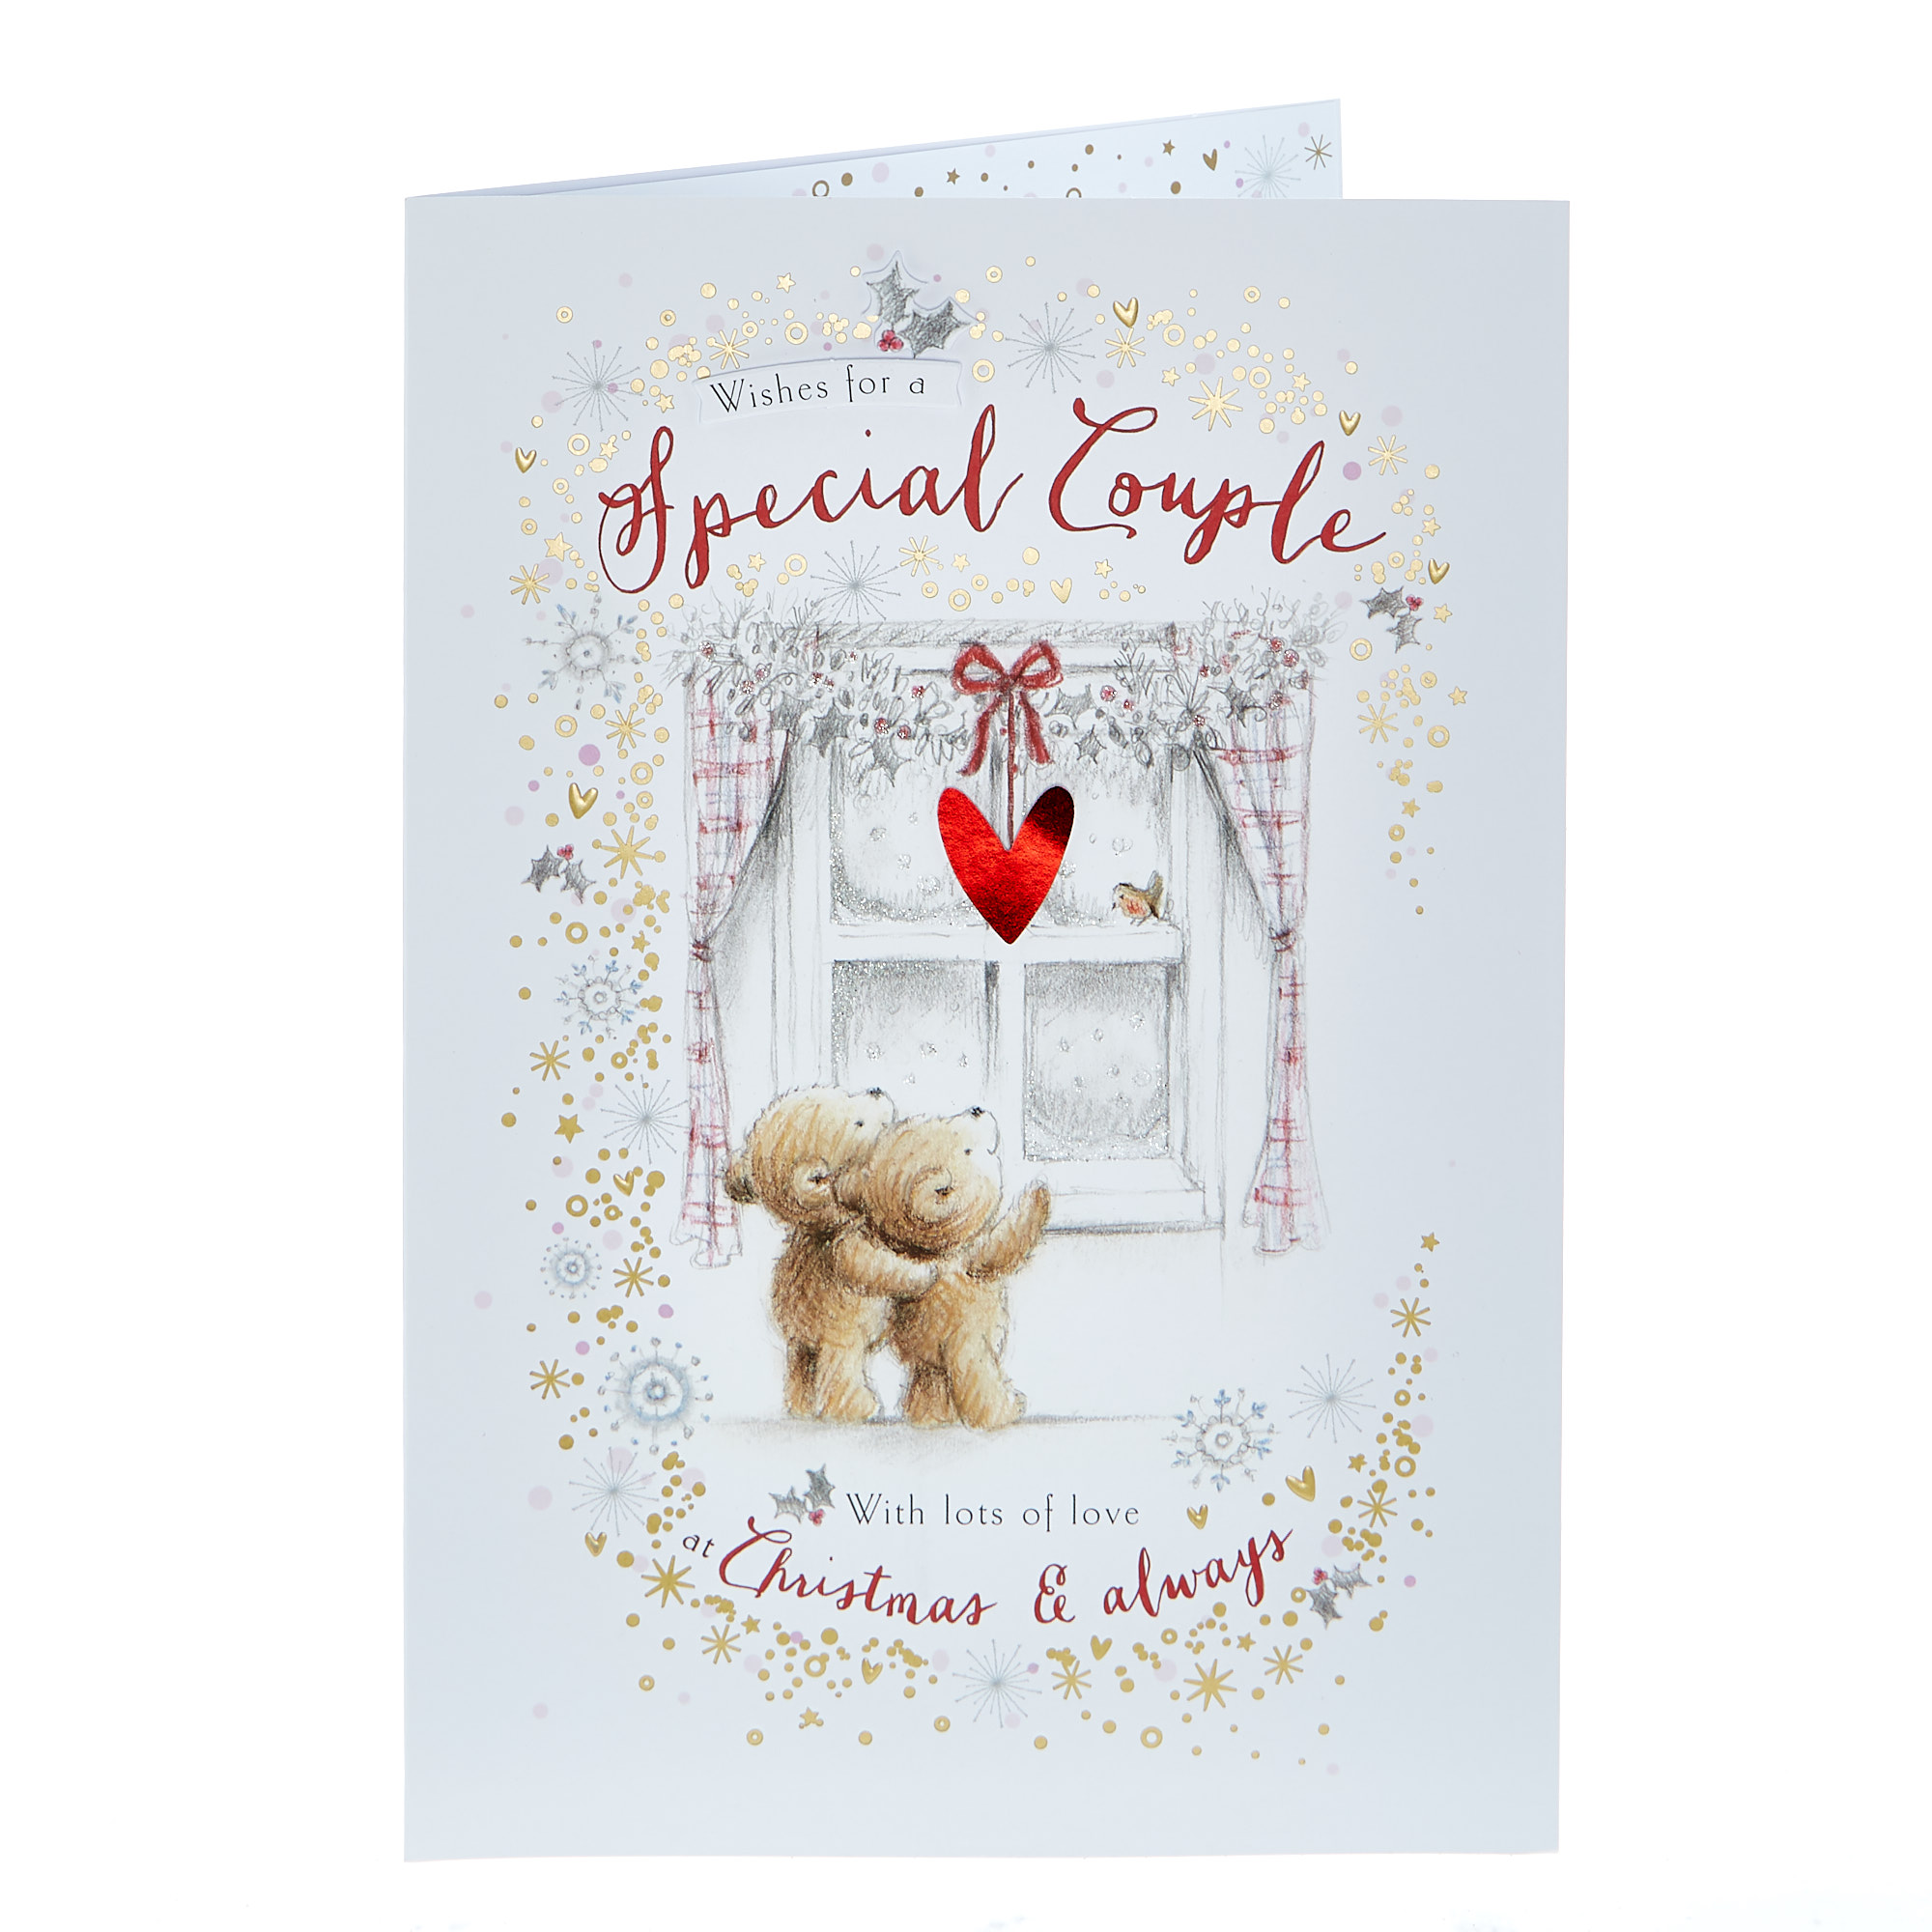 Christmas Card - Wishes For A Special Couple